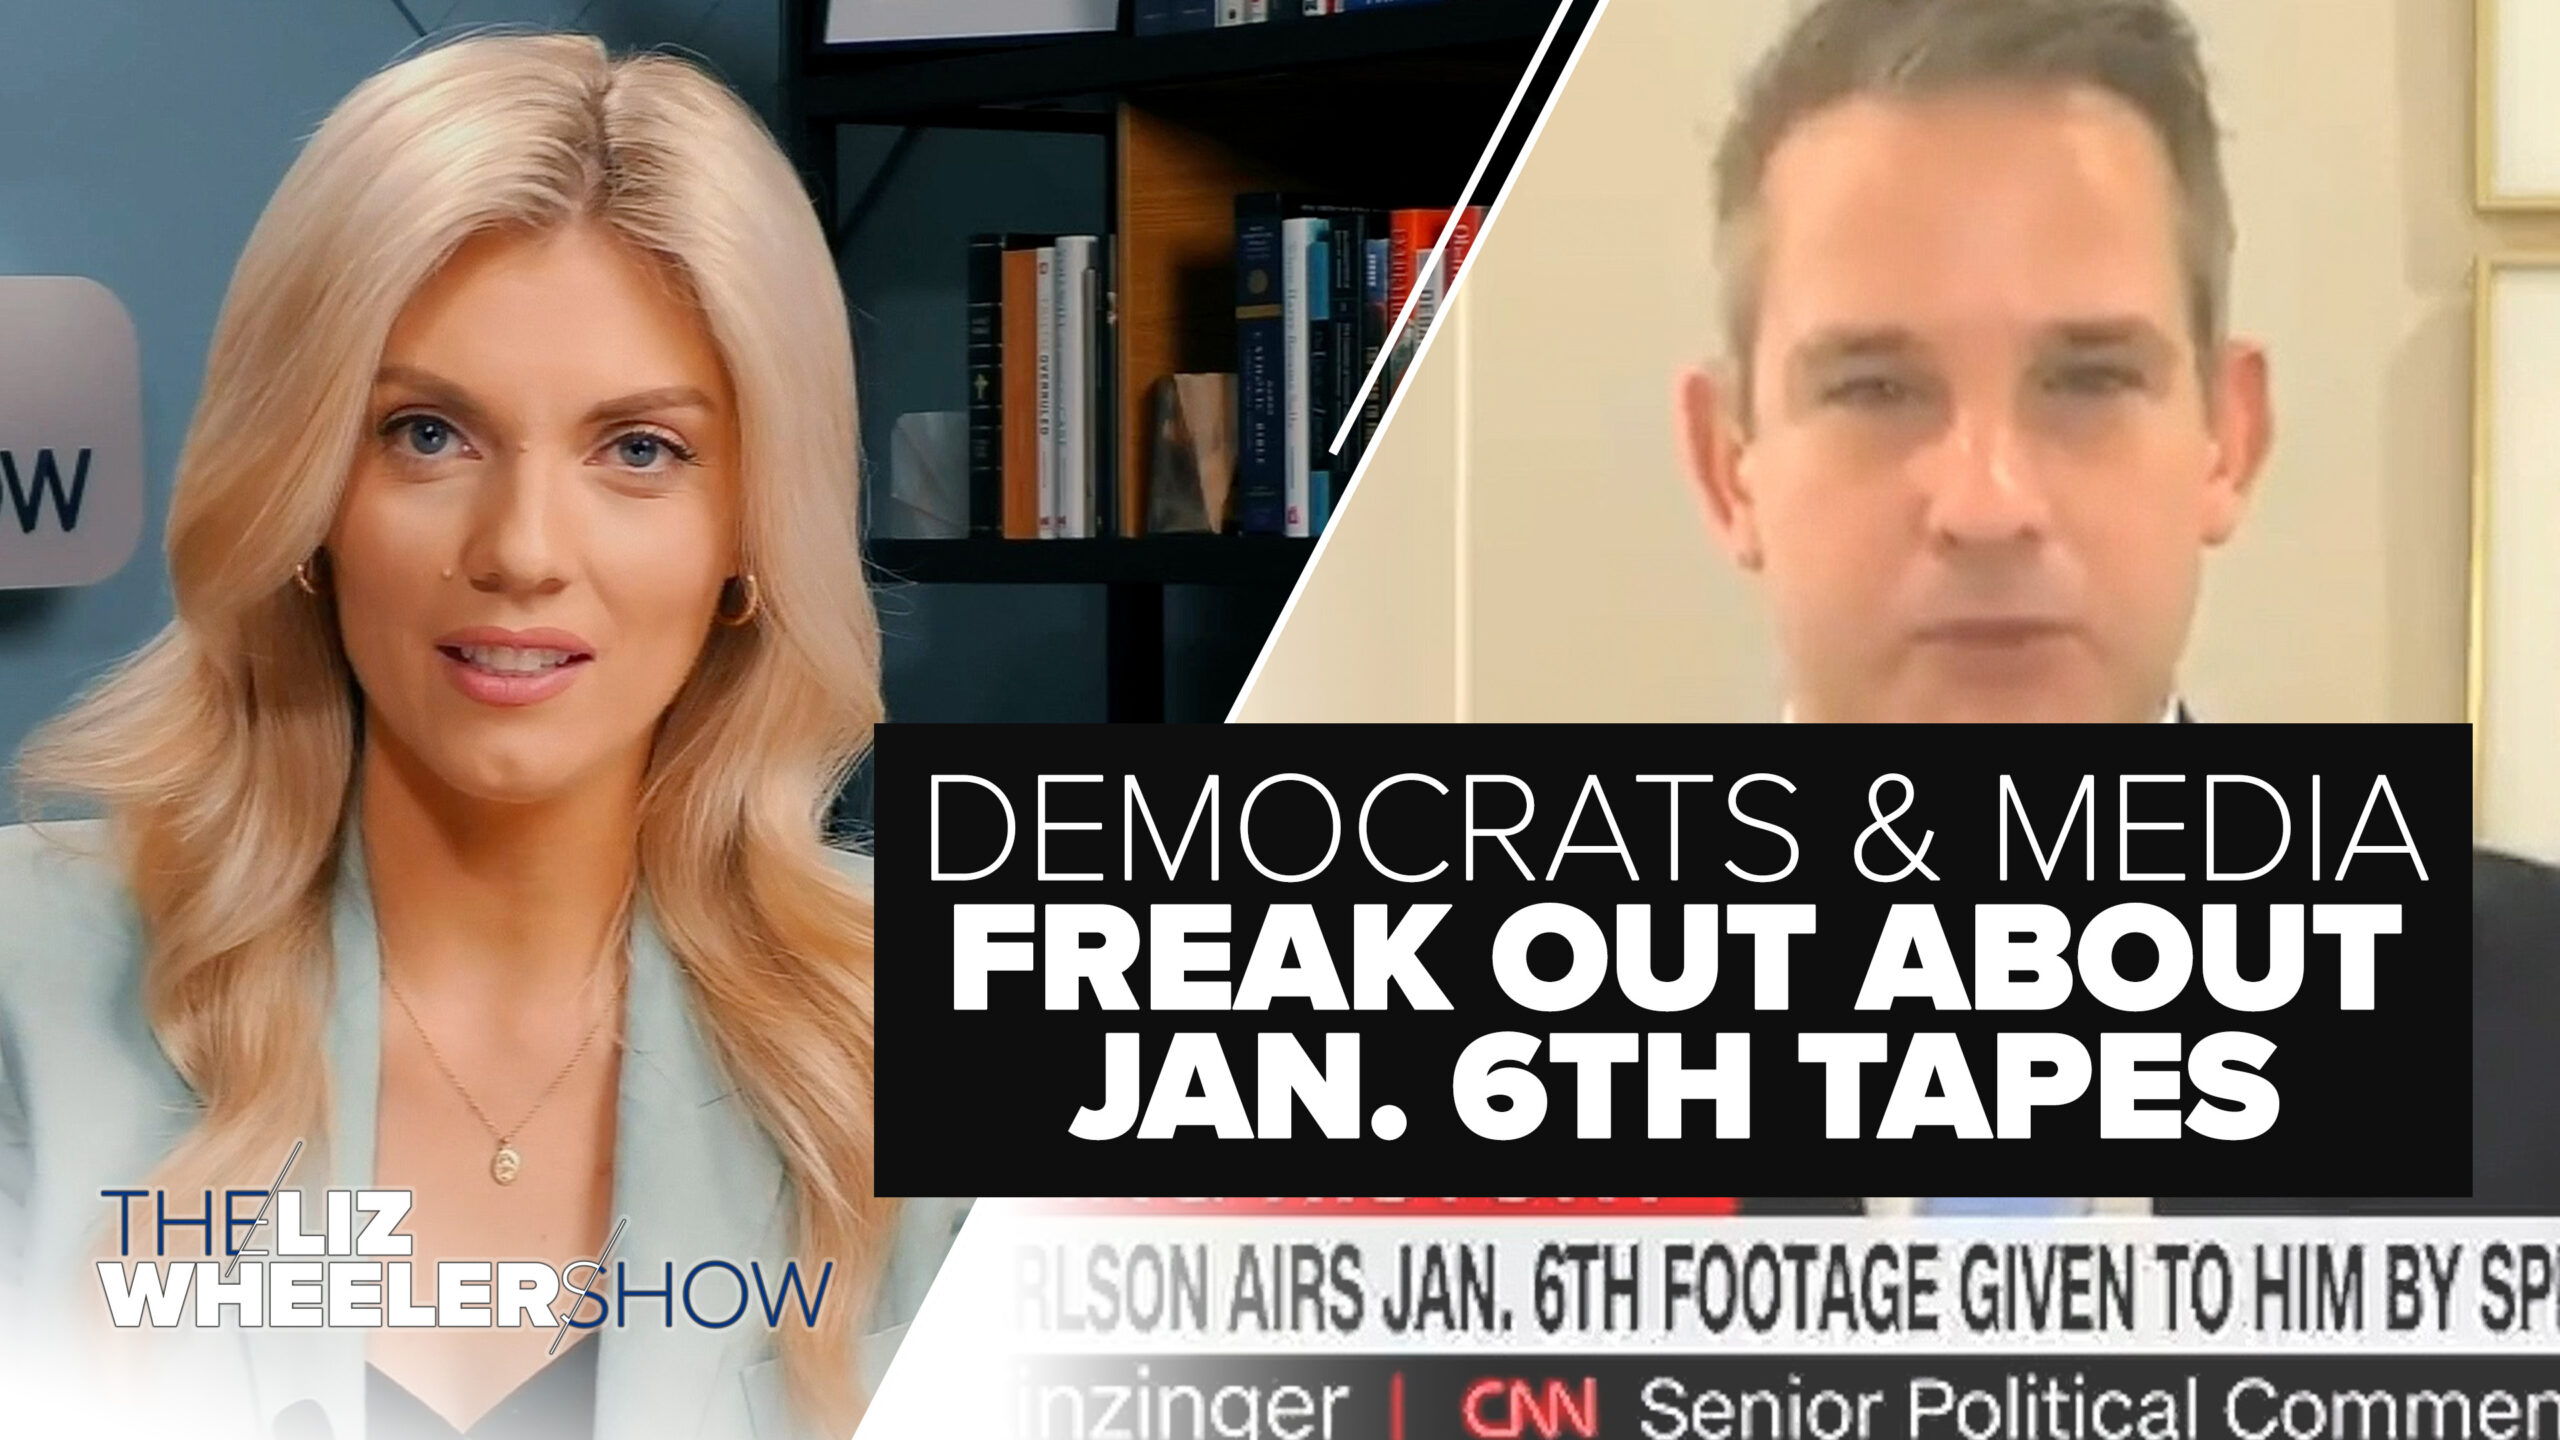 CNN contributor Adam Kinzinger talking about the January 6th tapes